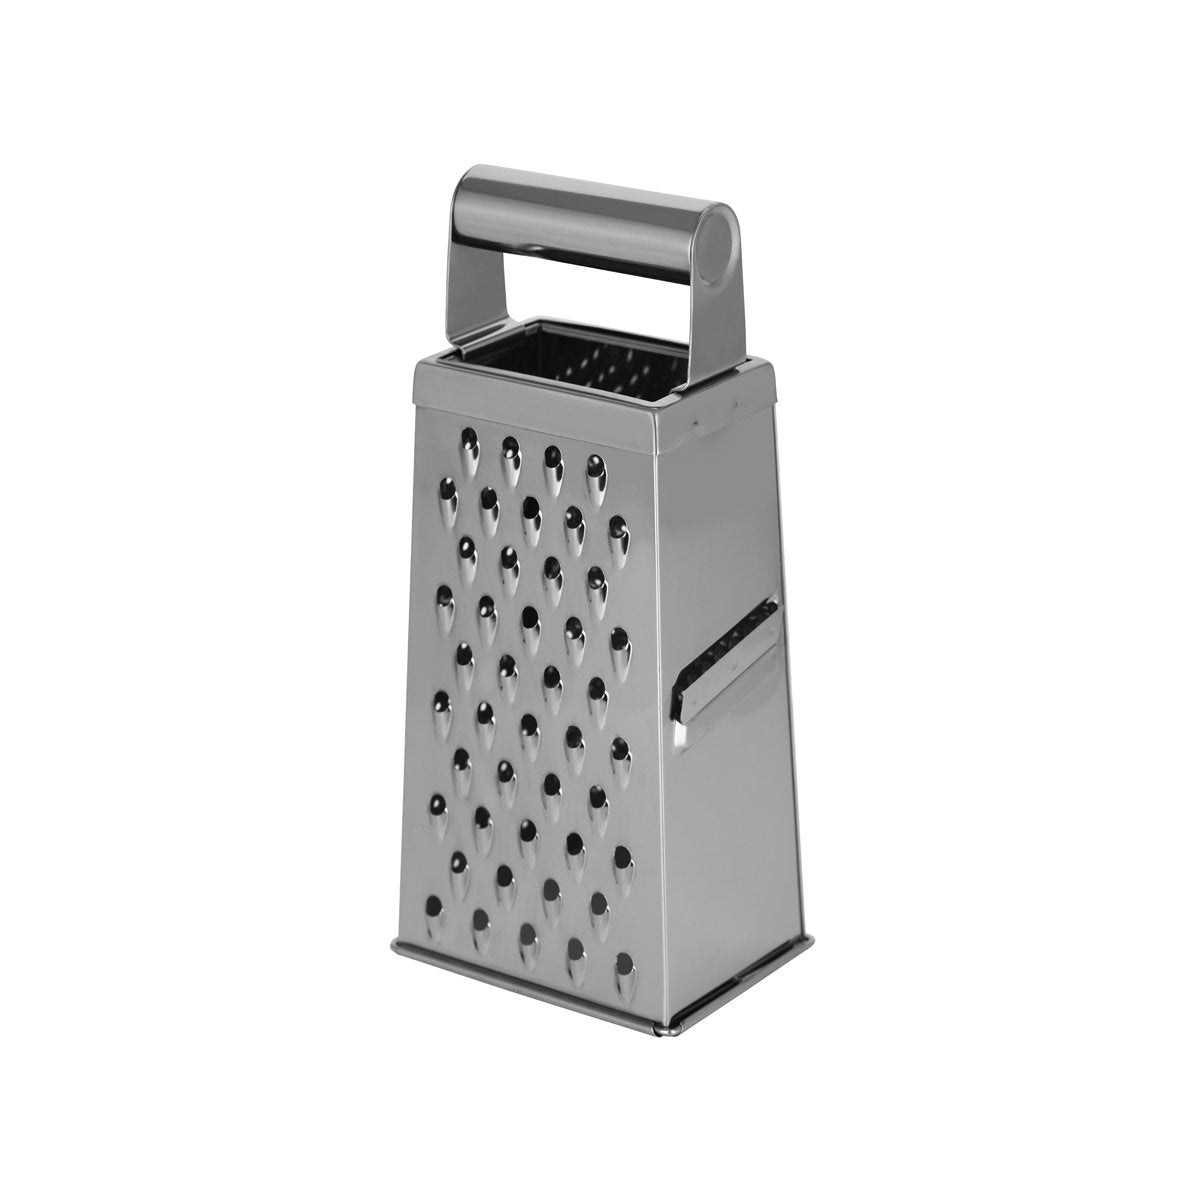 07352 Chef Inox Grater 4 Sided Tube Handle 190mm Tomkin Australia Hospitality Supplies